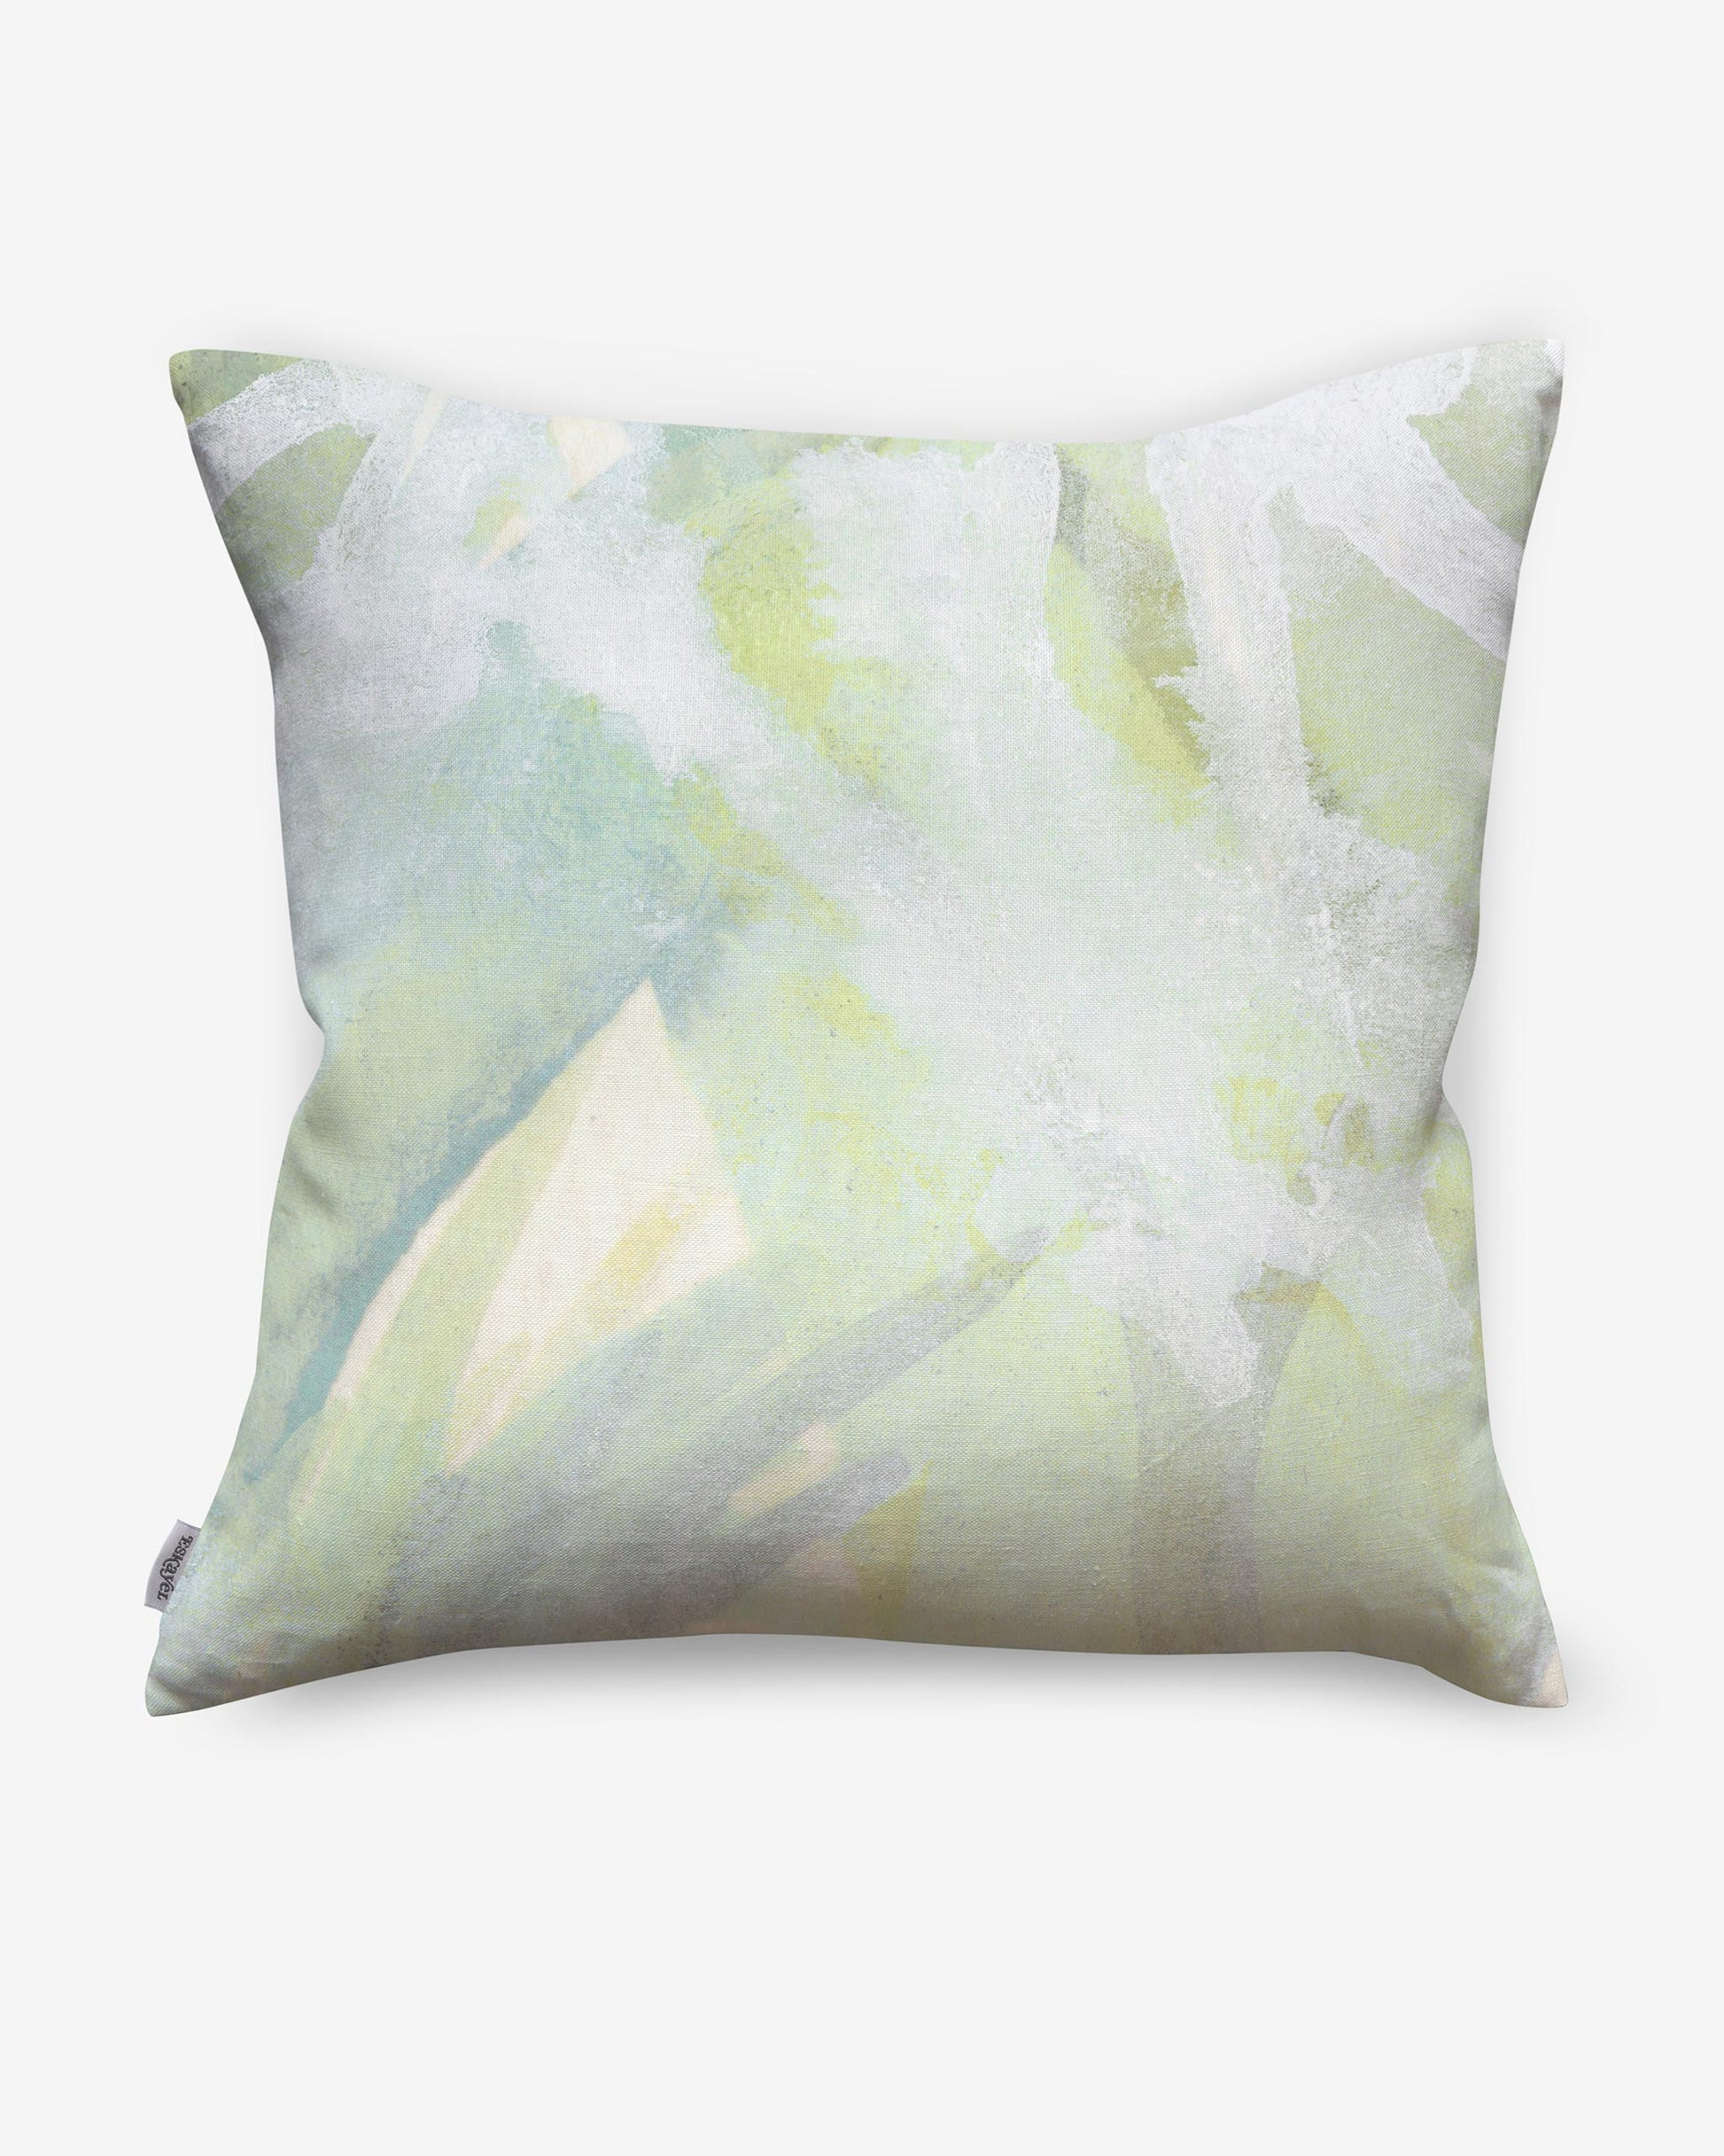 A Regalo di Dio Pillow Luminosa with a green and white mural painting on it